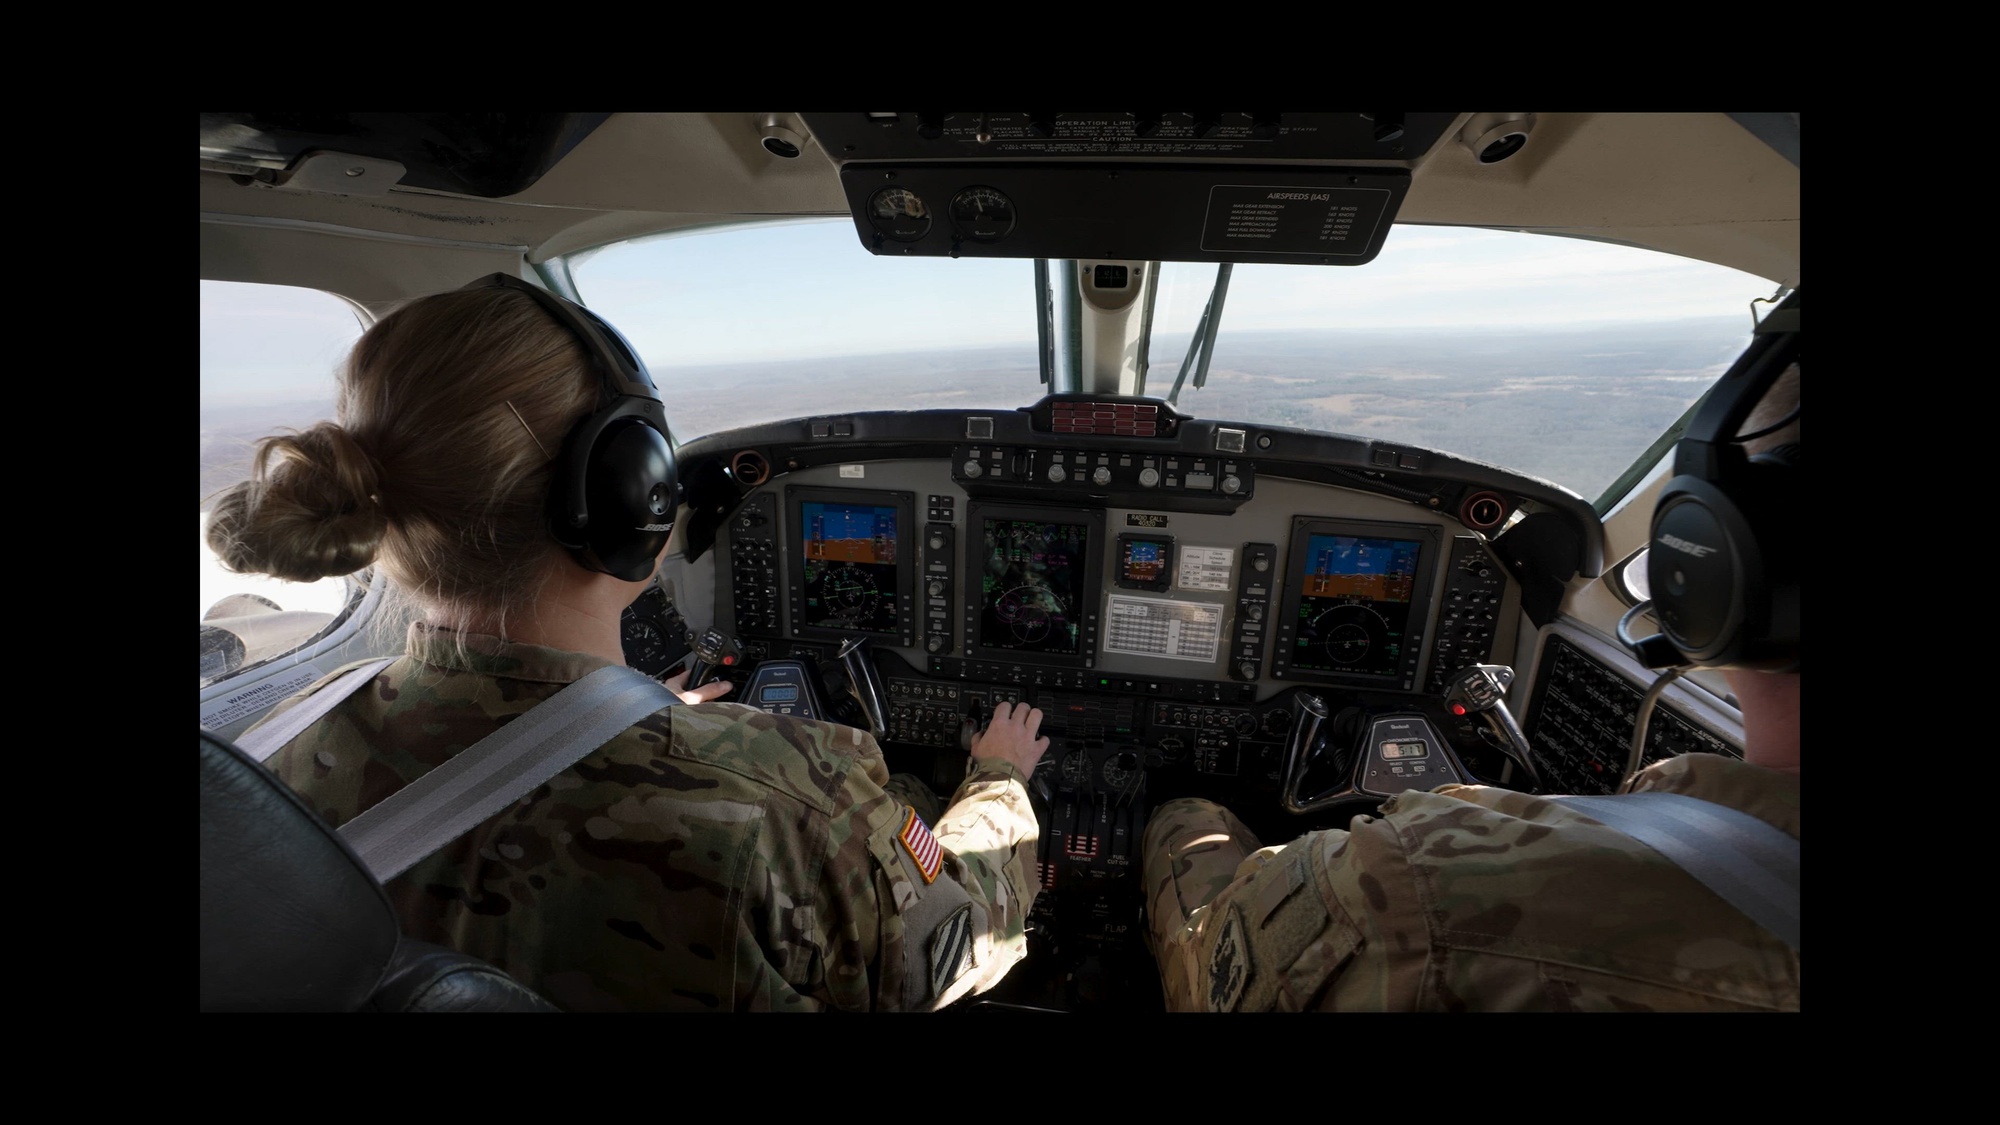 Want an exciting career of a U.S. Army Reserve Fixed Wing Pilot while managing your civilian profession? The Army Reserve Aviation Command is hiring, and we want you! Call 502-626-5778 or email usarmy.usarc.arac.list.r3-division@army.mil to learn more.